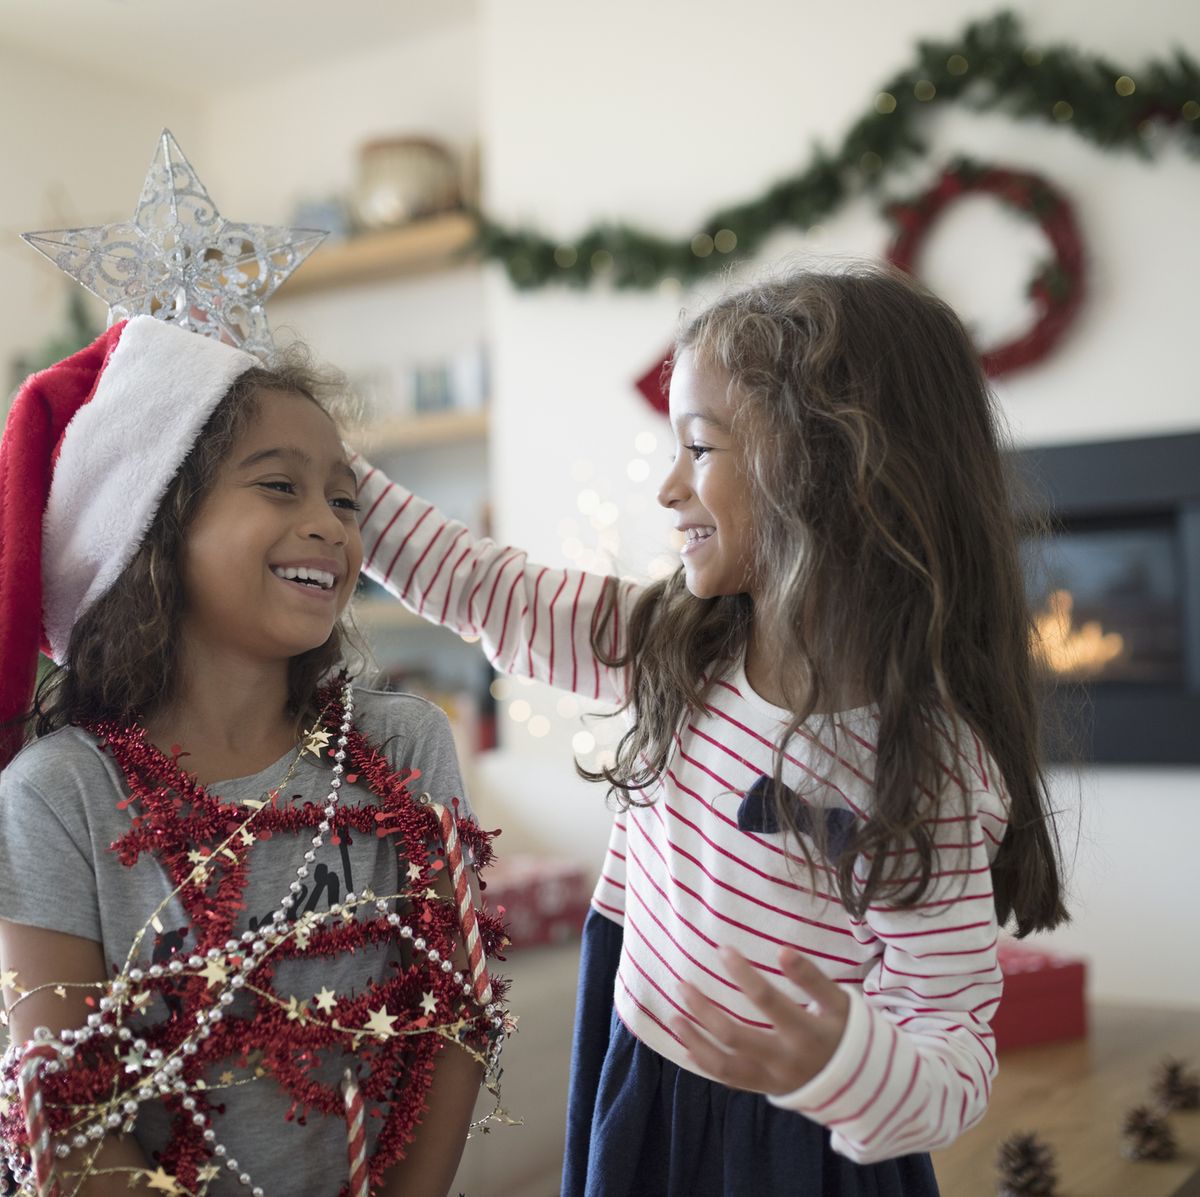 Free Holiday Fitness Activities for Kids for Cool Christmas Fun